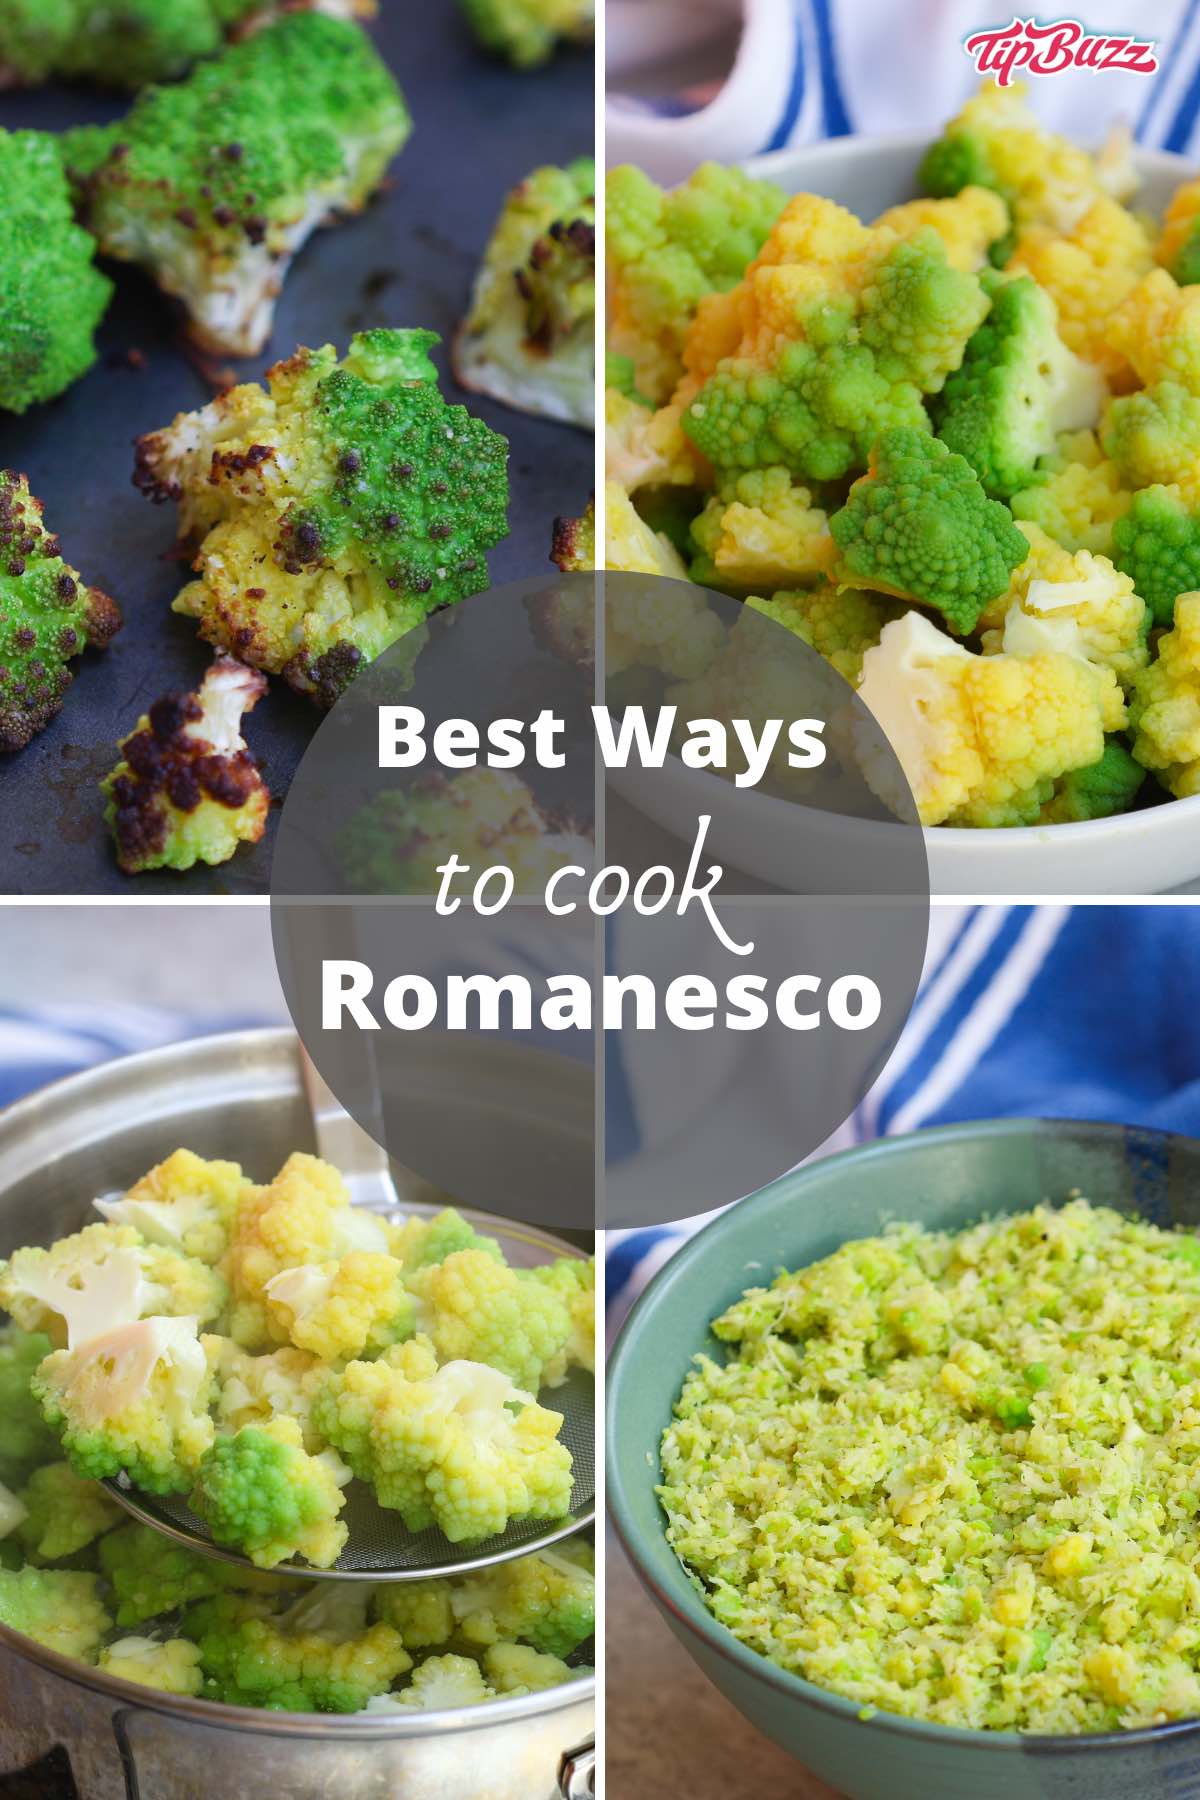 Romanesco is a delicious vegetable that's a cross between broccoli and cauliflower. It's so easy to prepare by boiling, roasting, ricing or steaming! #romanesco